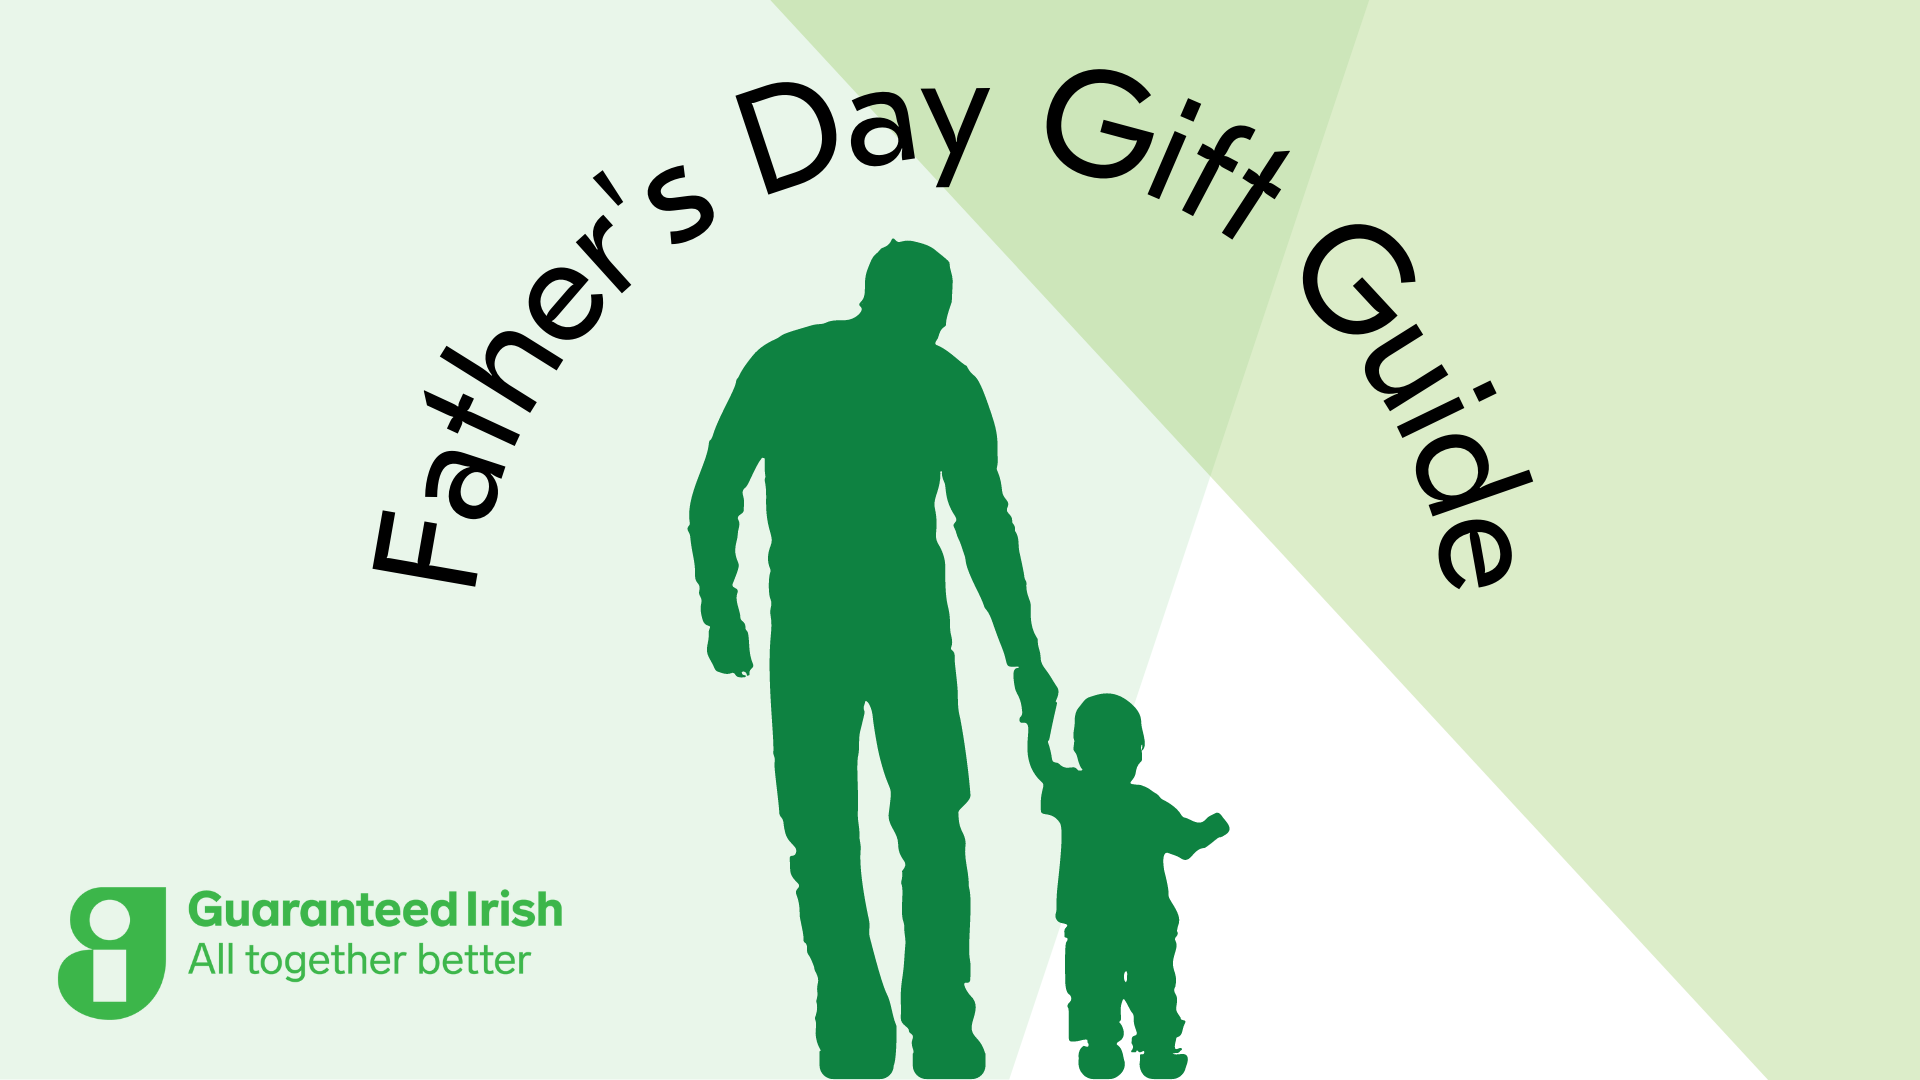 Gift with Guaranteed Irish this Father's Day